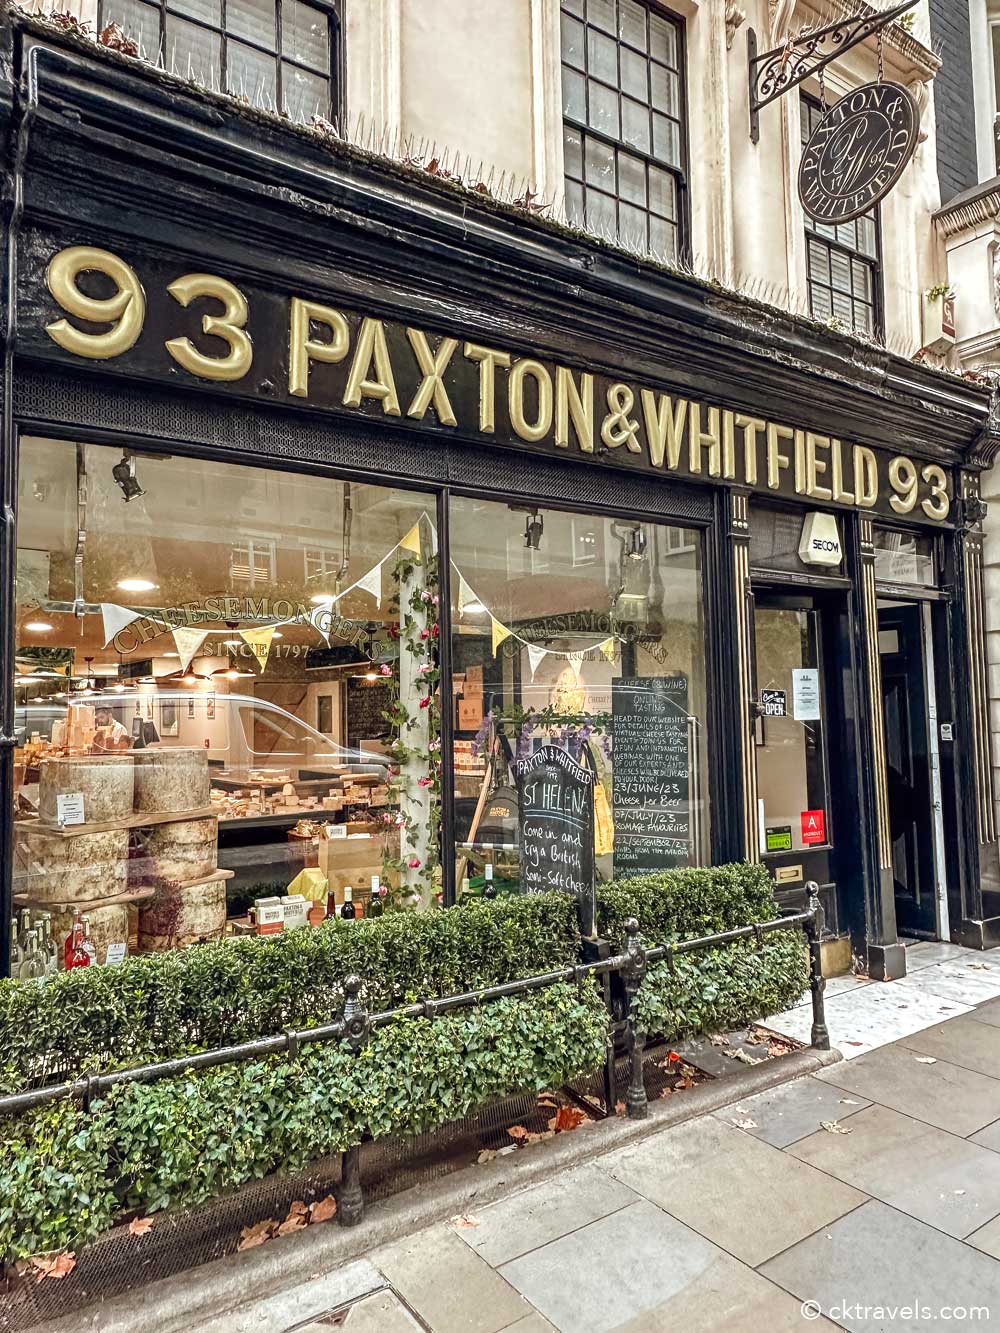 Paxton & Whitfield Cheese Shop near Piccadilly Circus London